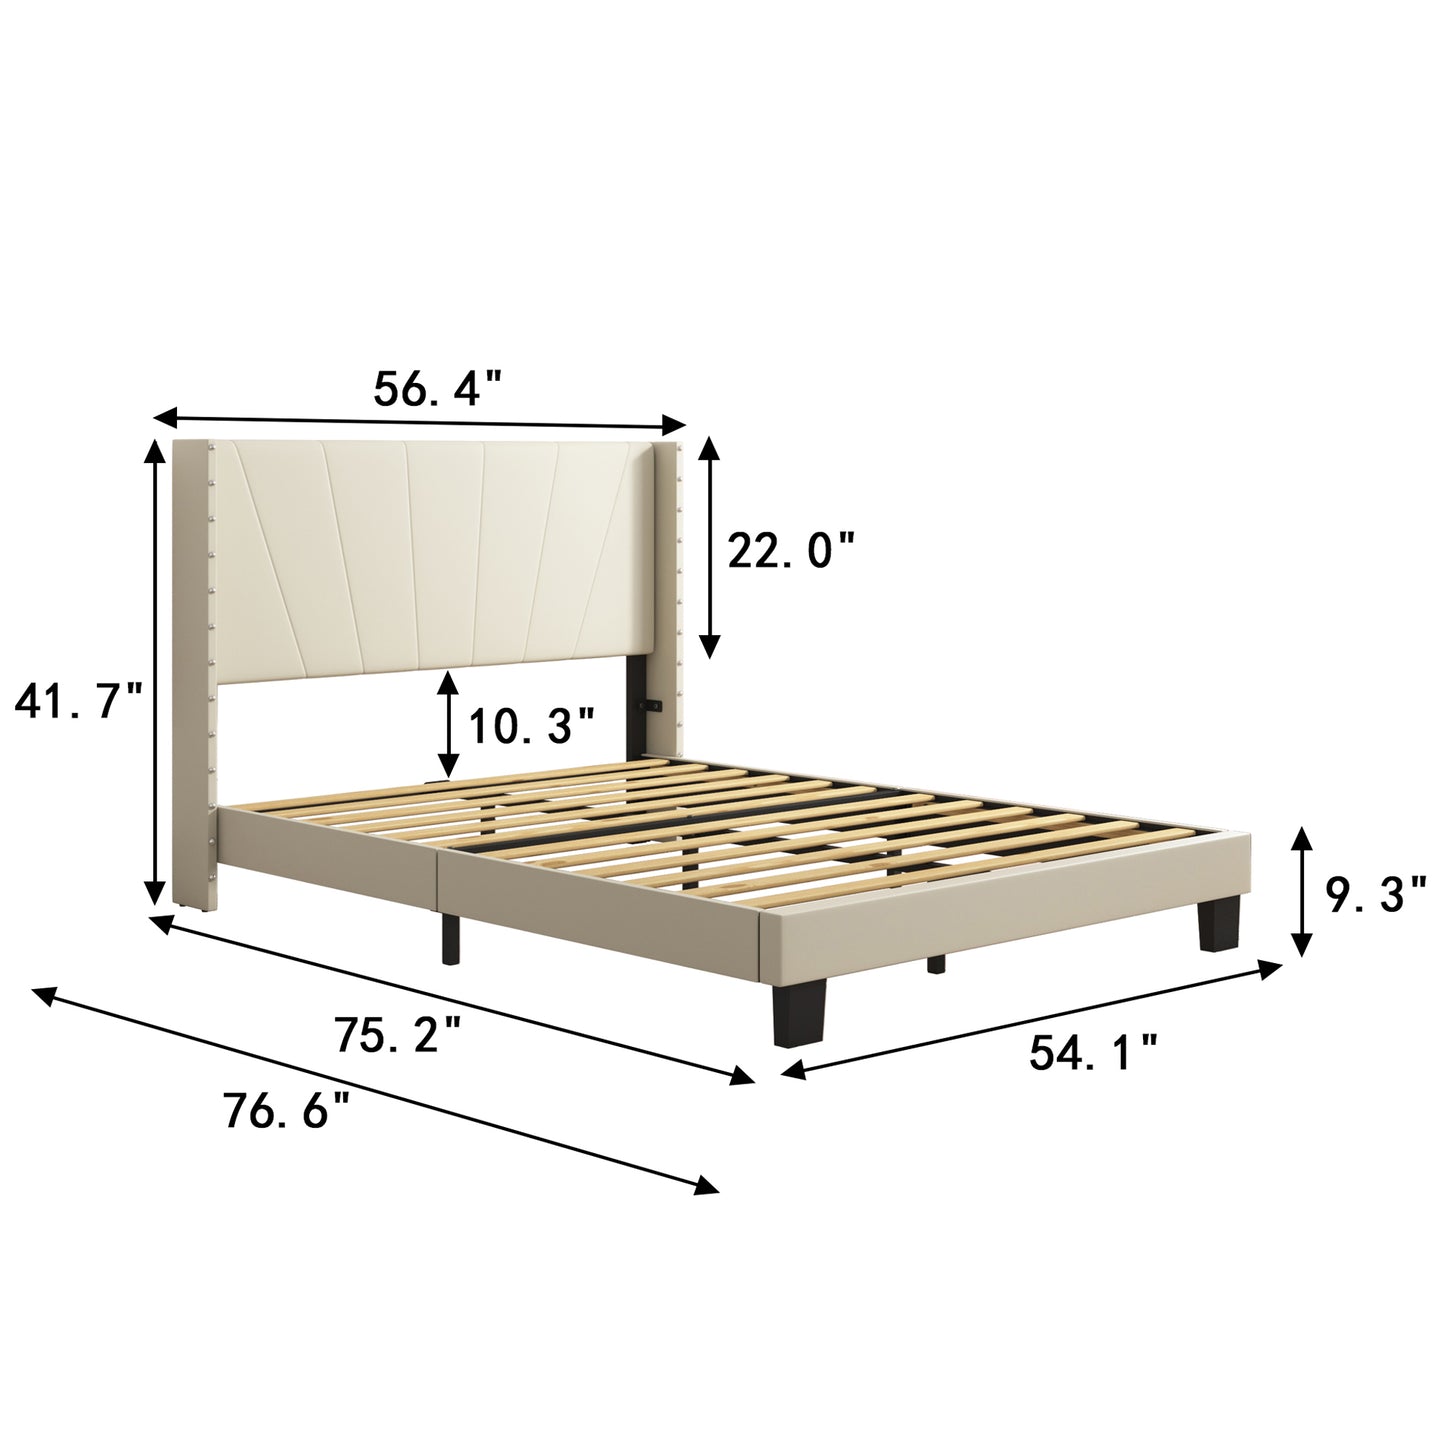 SYNGAR Beige Fabric Upholstered Platform Bed Frame Full Size with Elegant Headboard, Wood Frame Bedroom Furniture with Strong Slat Support, No Box Spring Needed, Noise Free, Easy Assembly